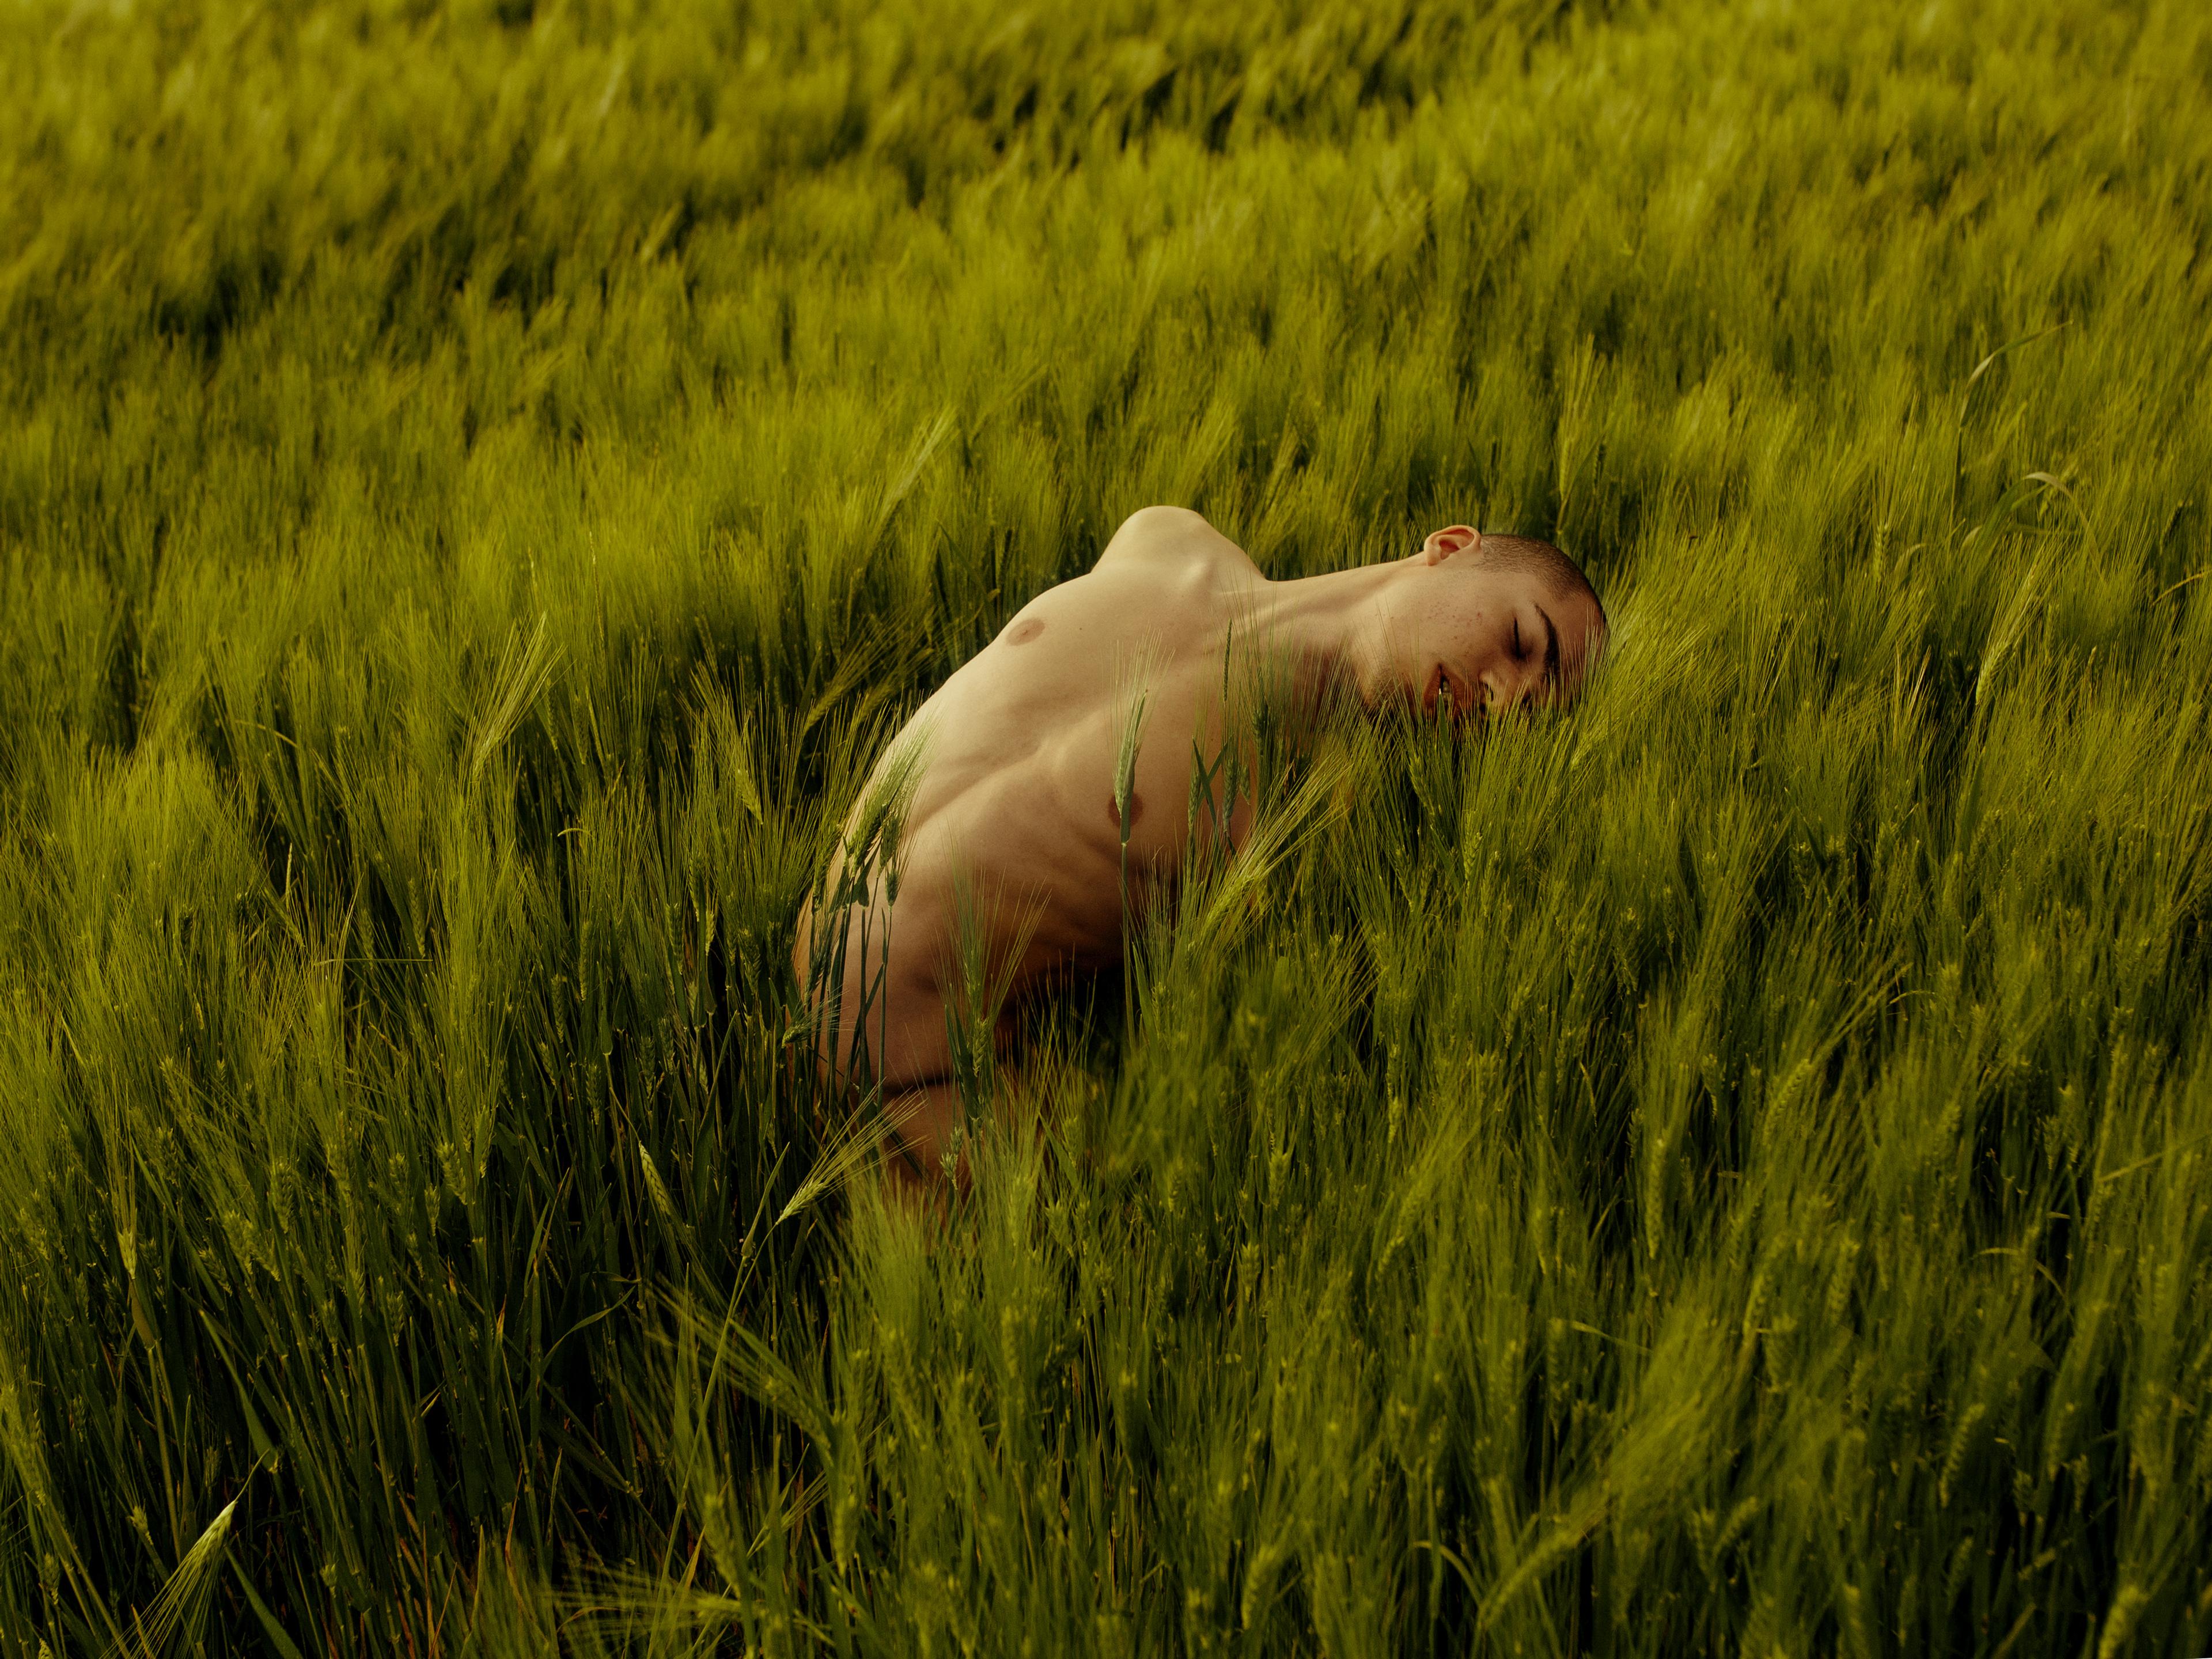 A photograph of an unclothed man posing outside in a field, tastefully covered by the surrounding tall grass